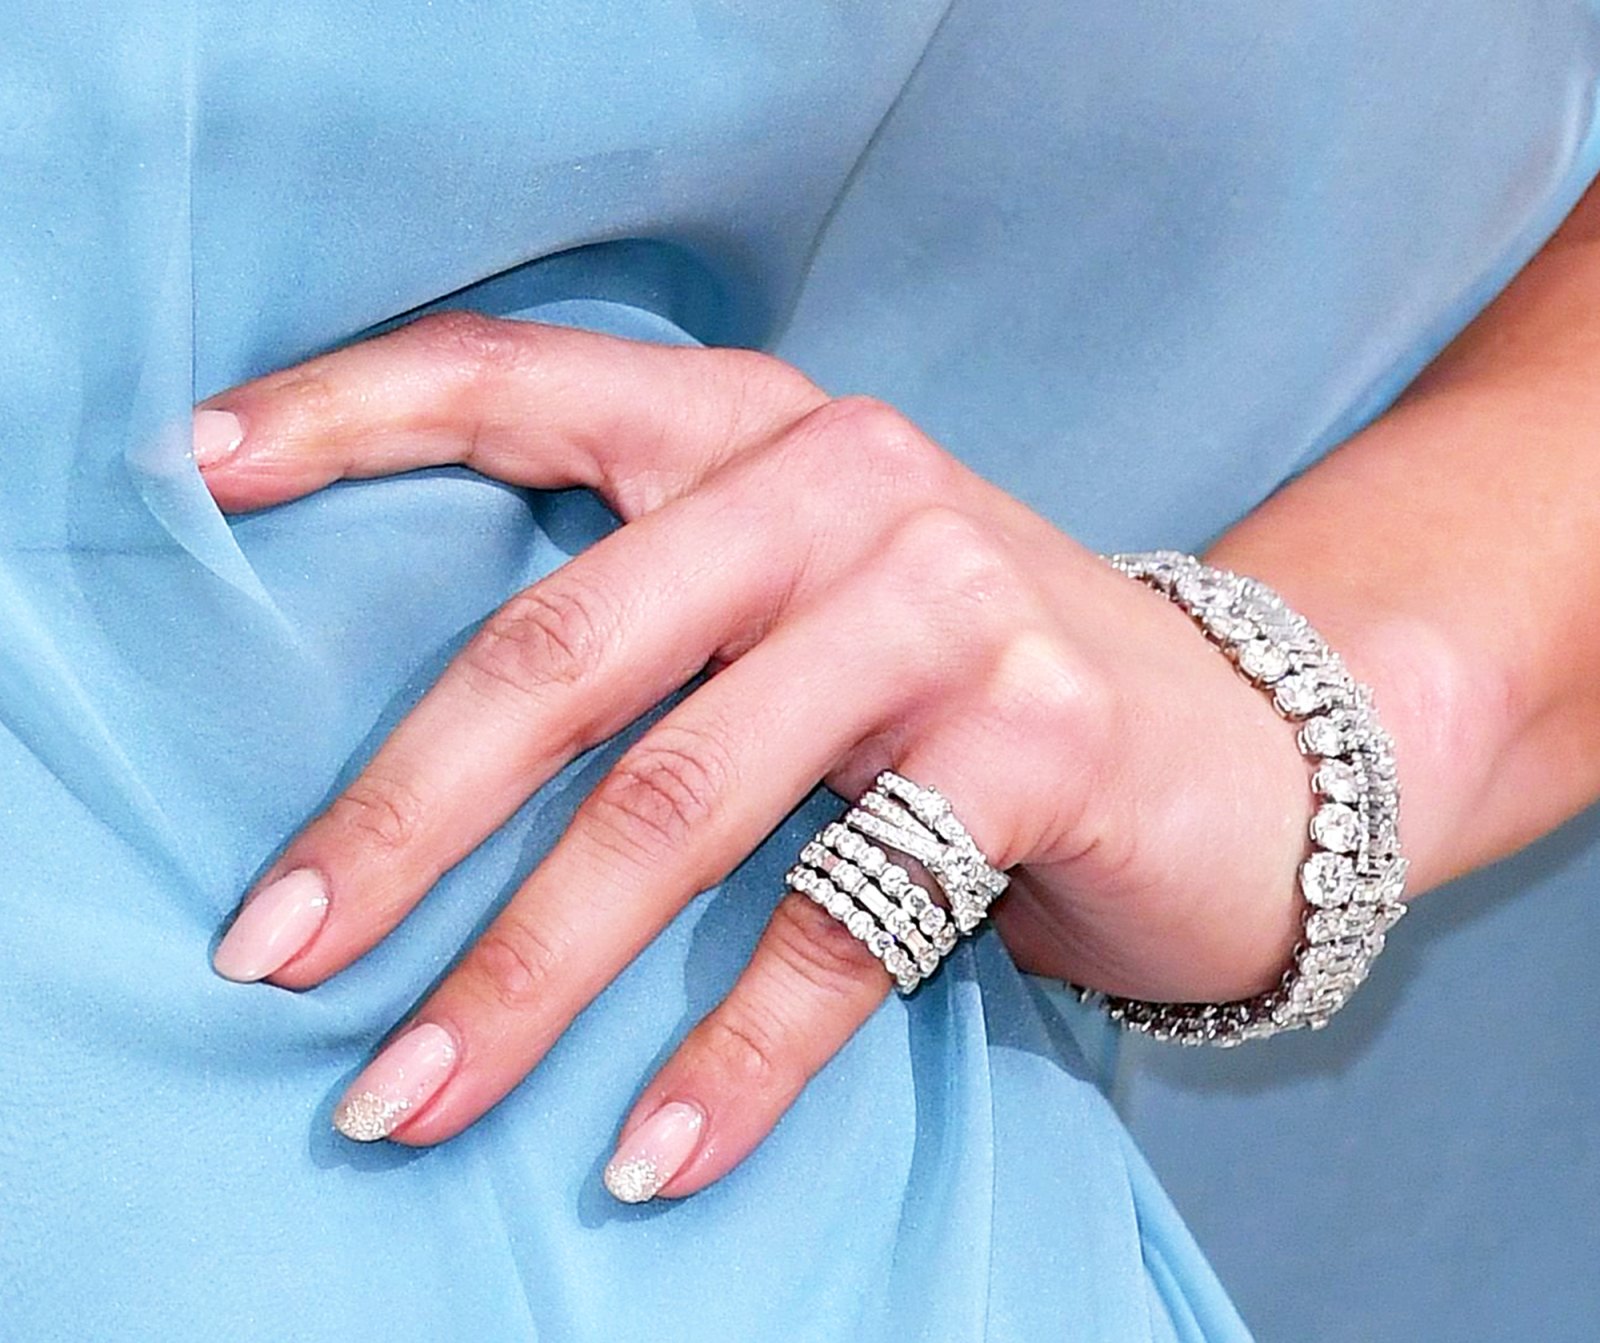 Blake Lively Wore Actual 24K Gold on Her Nails at the Met Gala 2017